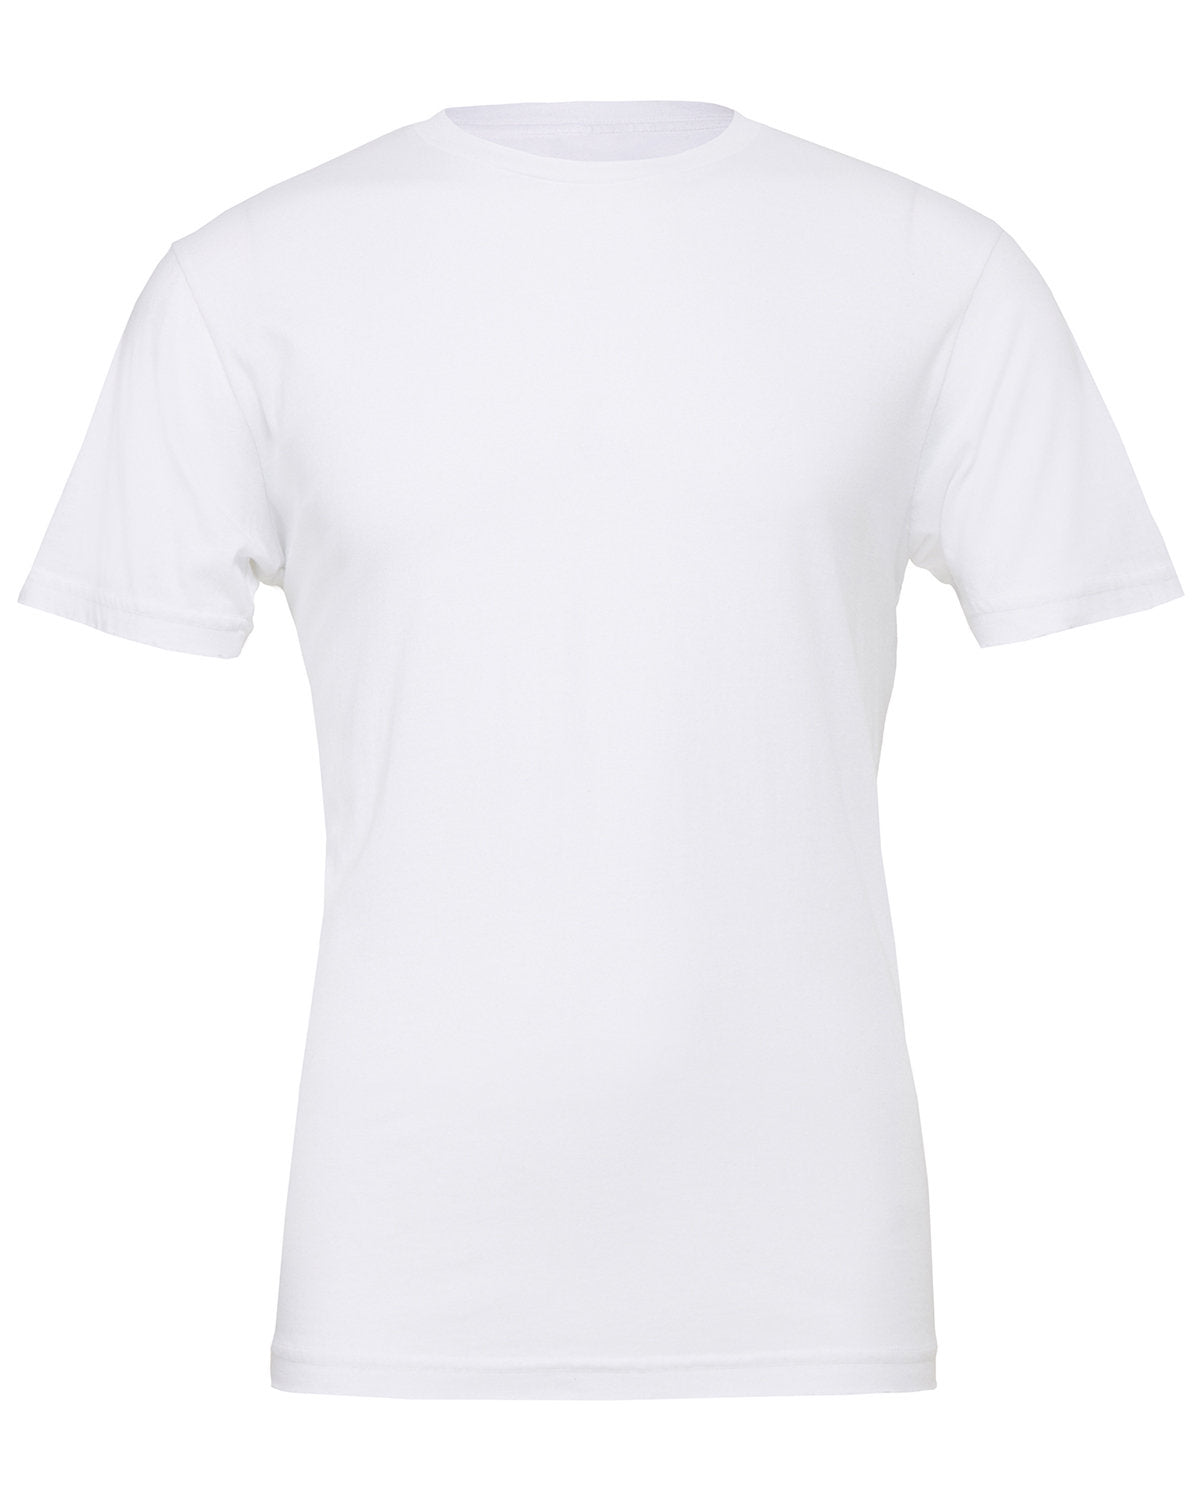 A plain white, short-sleeved Bella Canvas t-shirt displayed on a white background. The t-shirt, featuring custom embroidery, is designed for a snug fit with a round neckline by Show Off Your Threads.